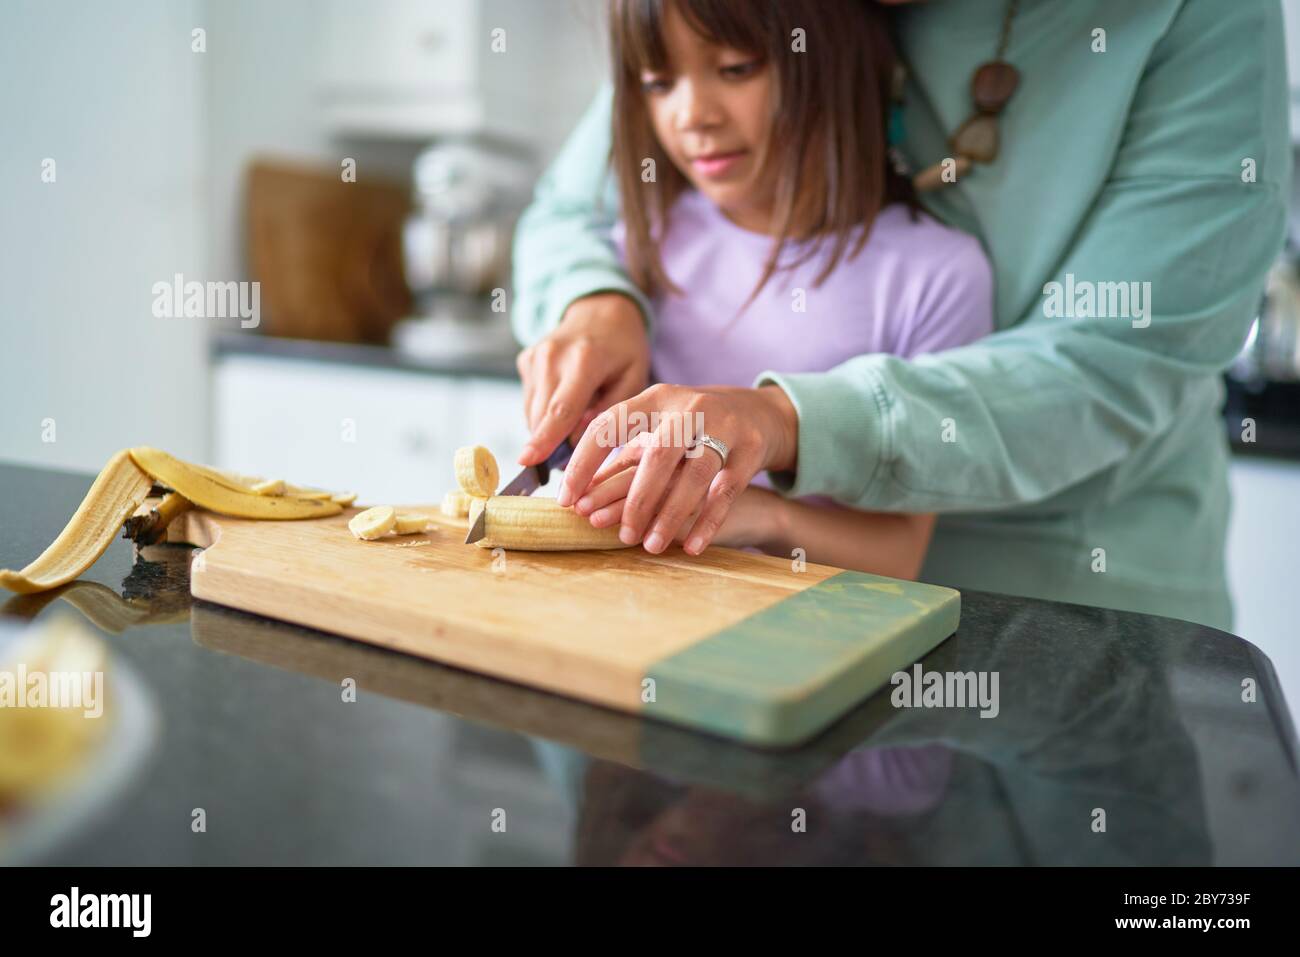 Mother helping daughter cut banana in kitchen Stock Photo